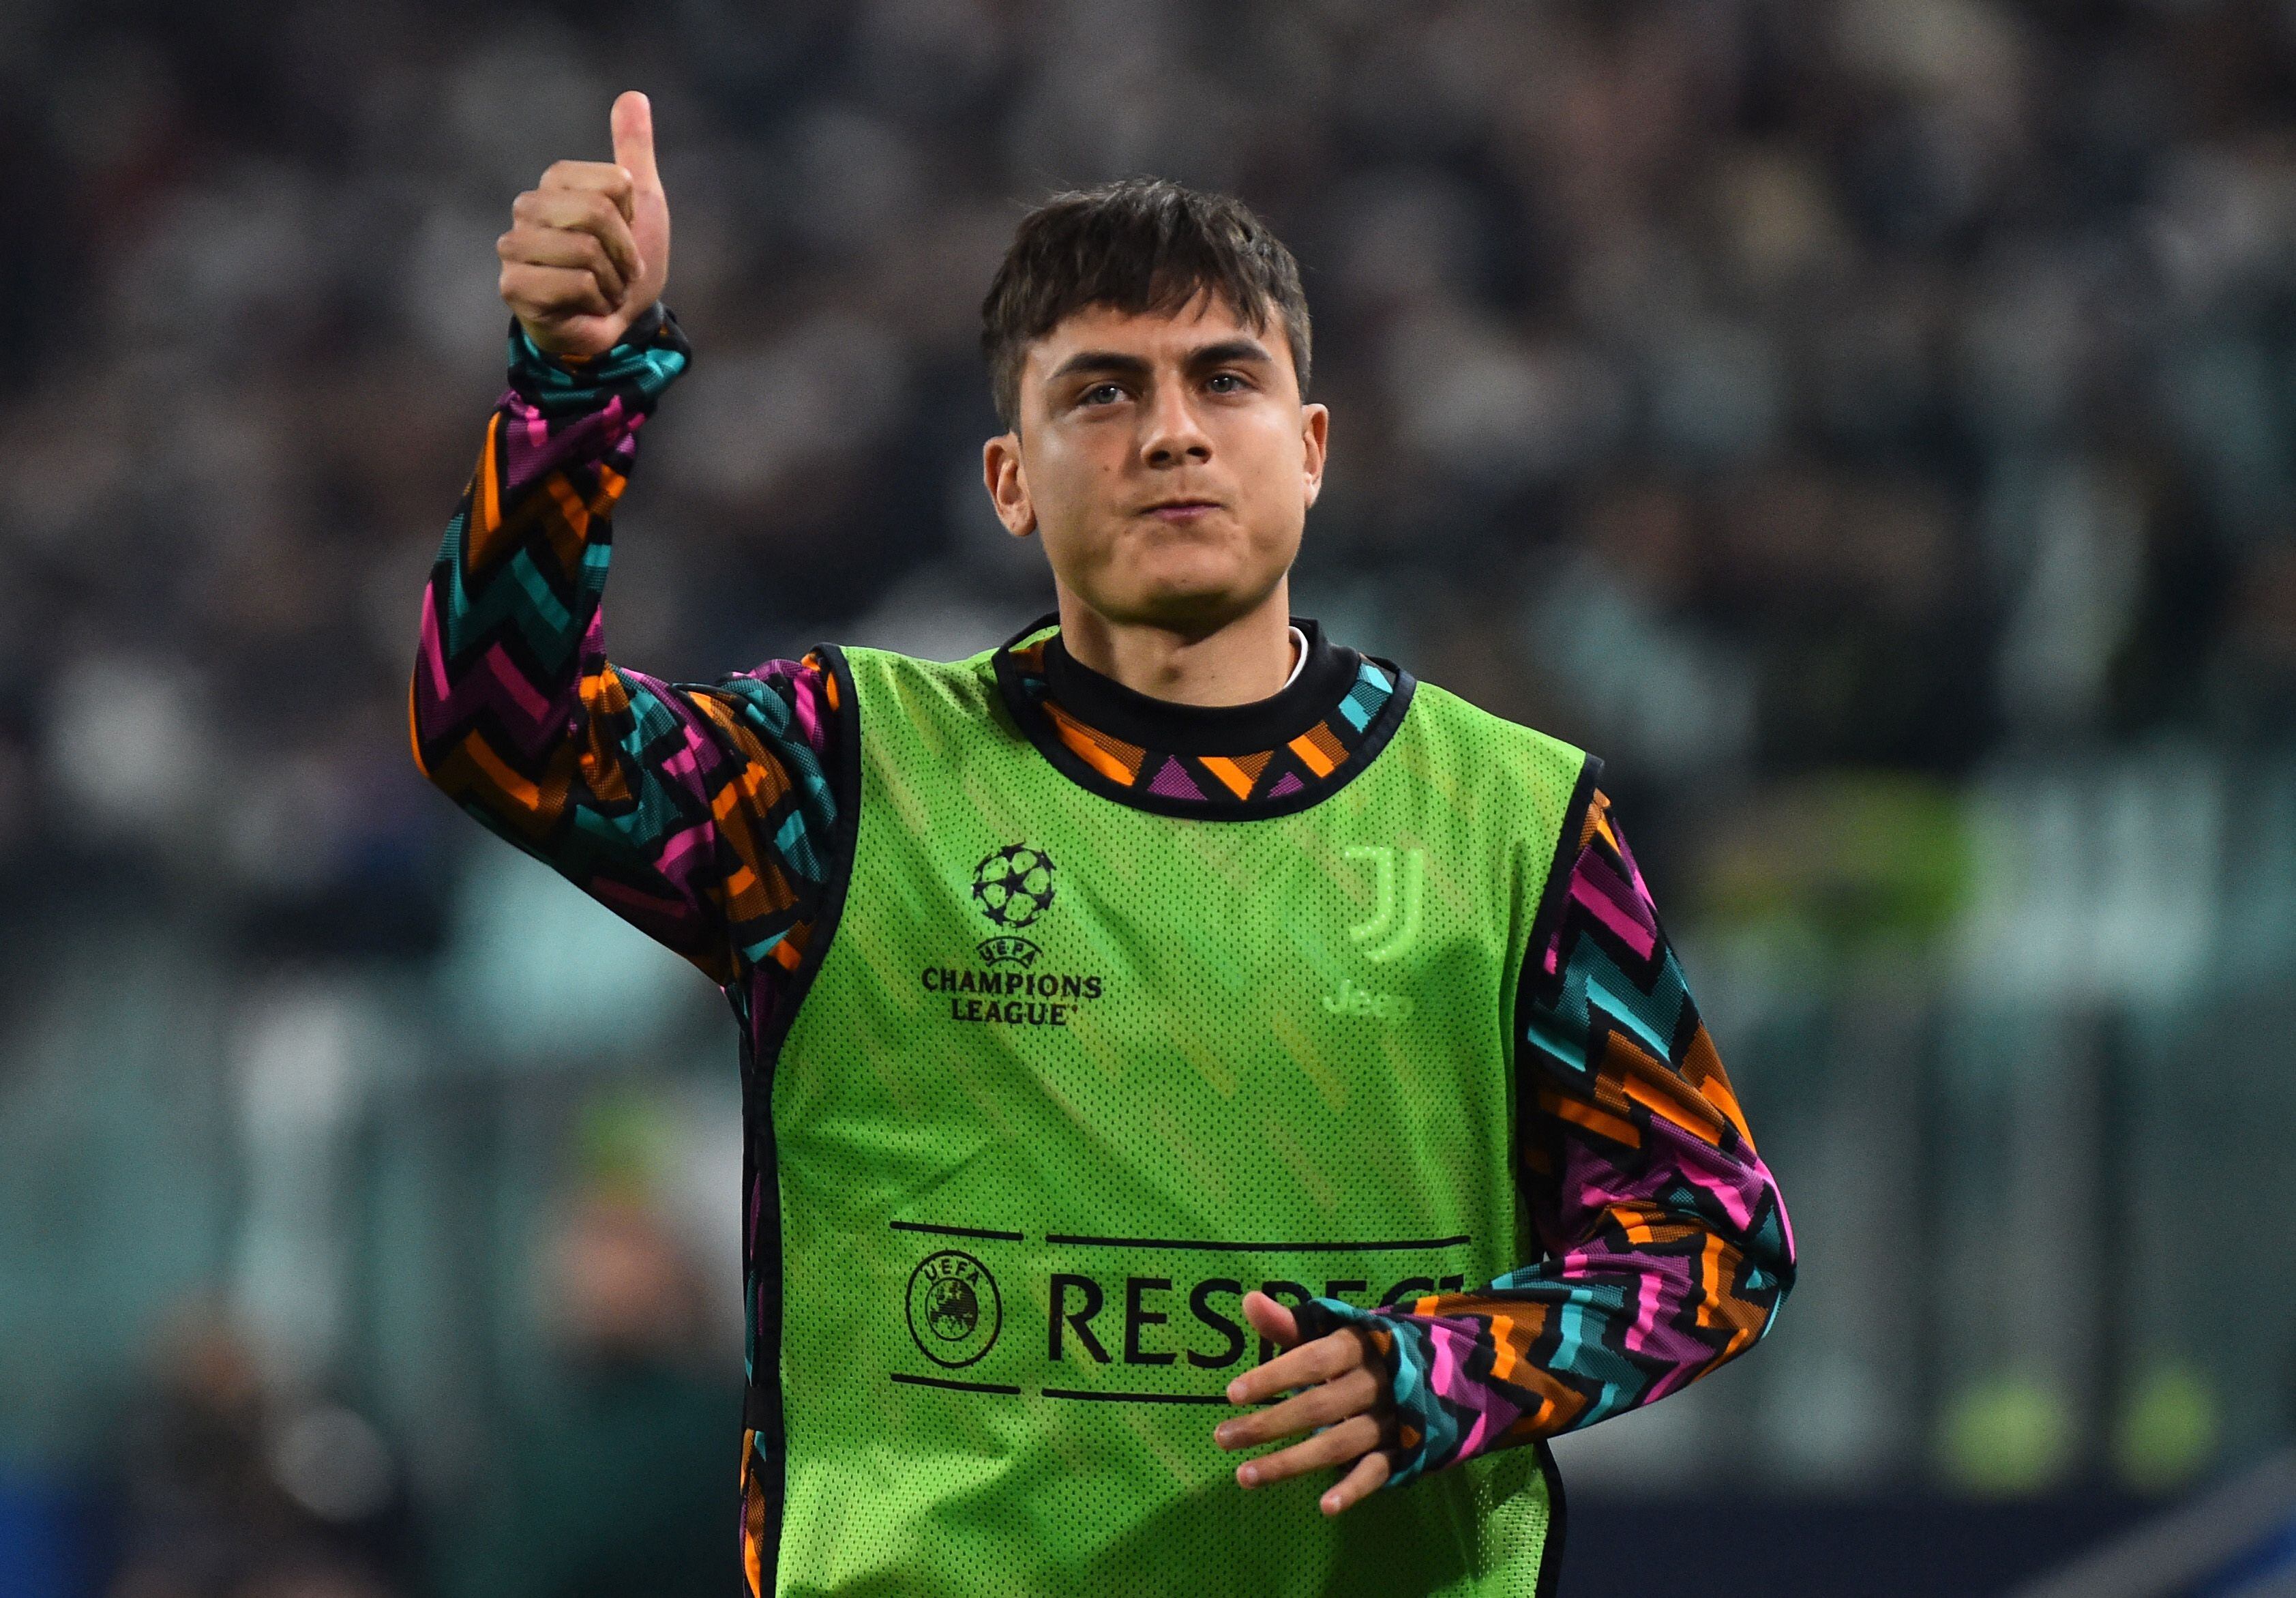 Failed meeting between Juventus and Dybala: the striker could go free and  there are already big guys from Europe interested in him - Infobae